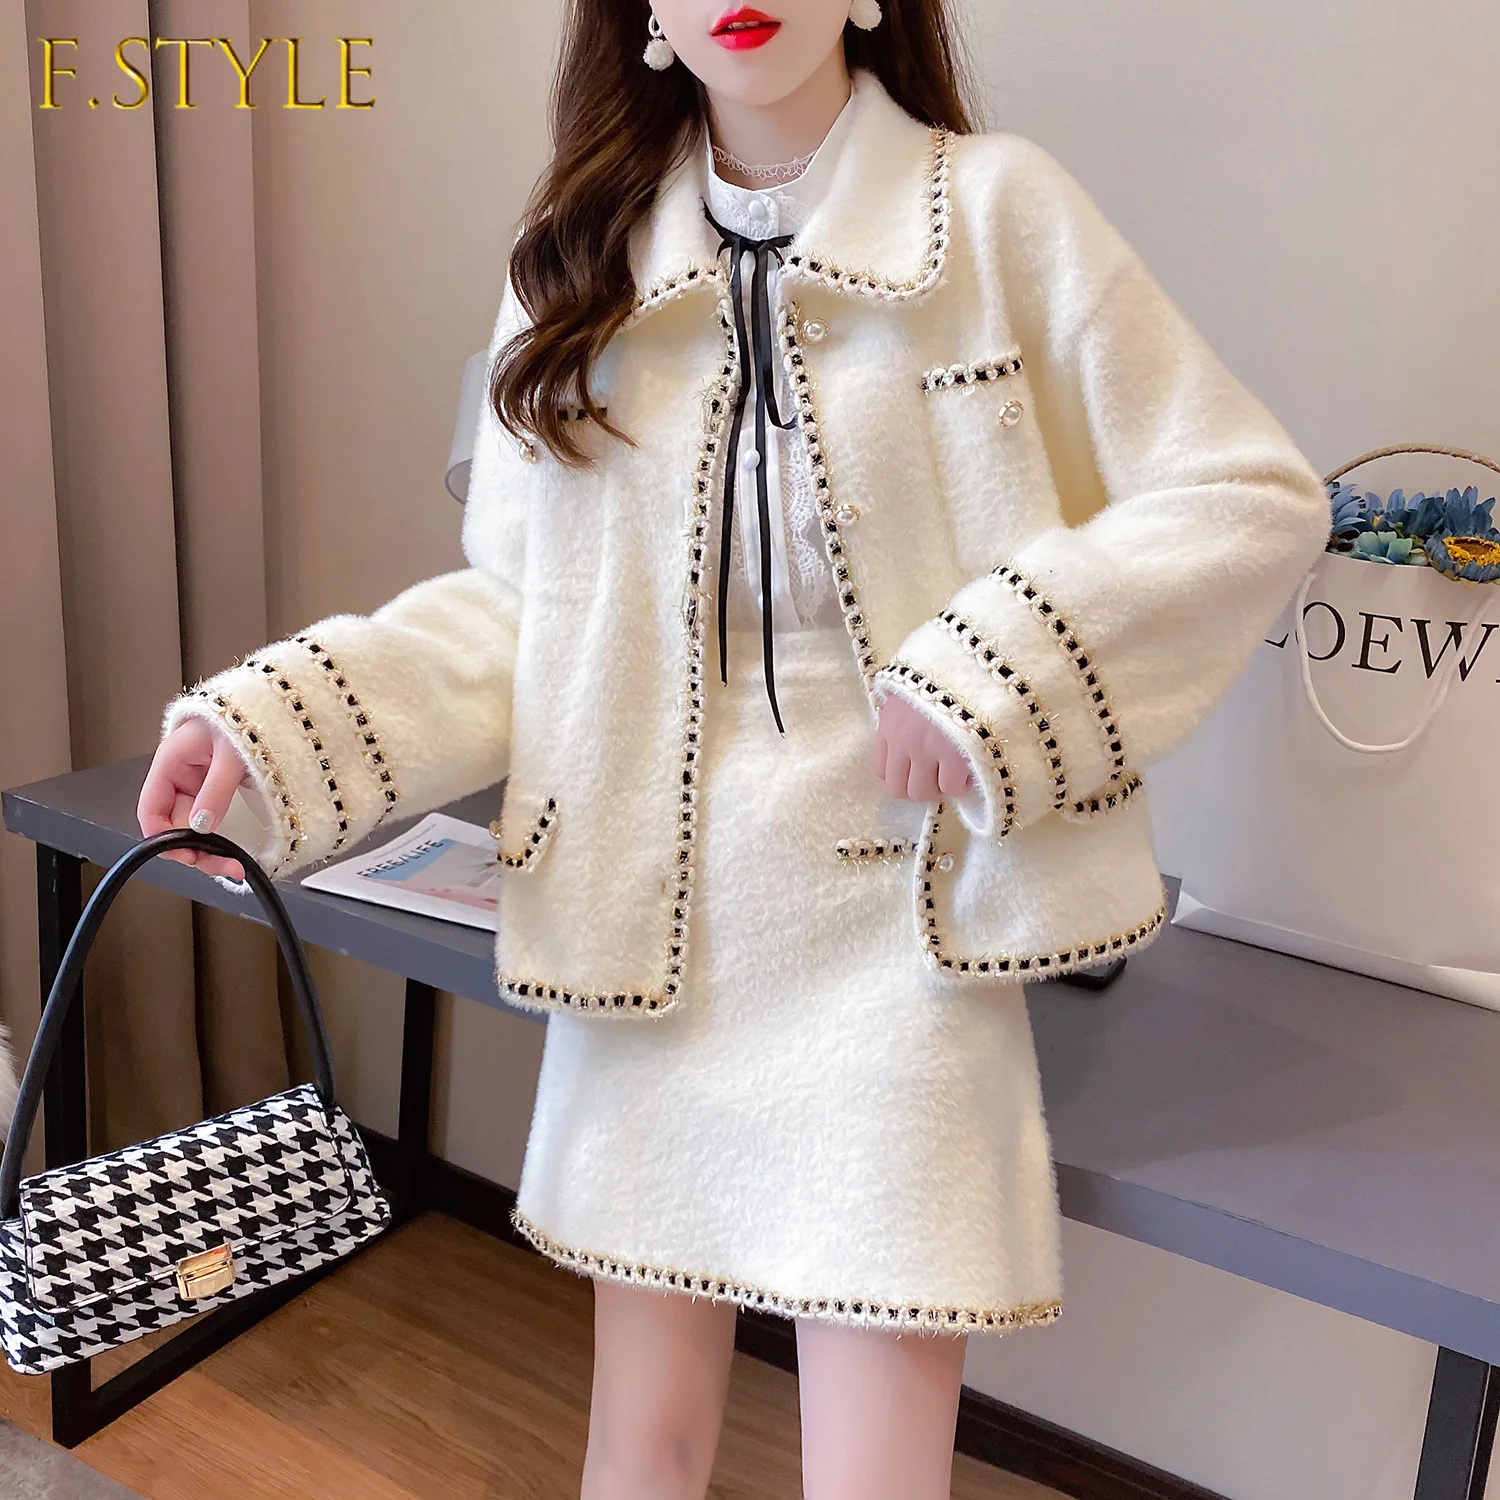 Women Fashion Autumn New Two-Piece Suit Harajuku Sweater Cardigans And Skirts Suit Elegant OL Sweater Suit Fake Mink Suit